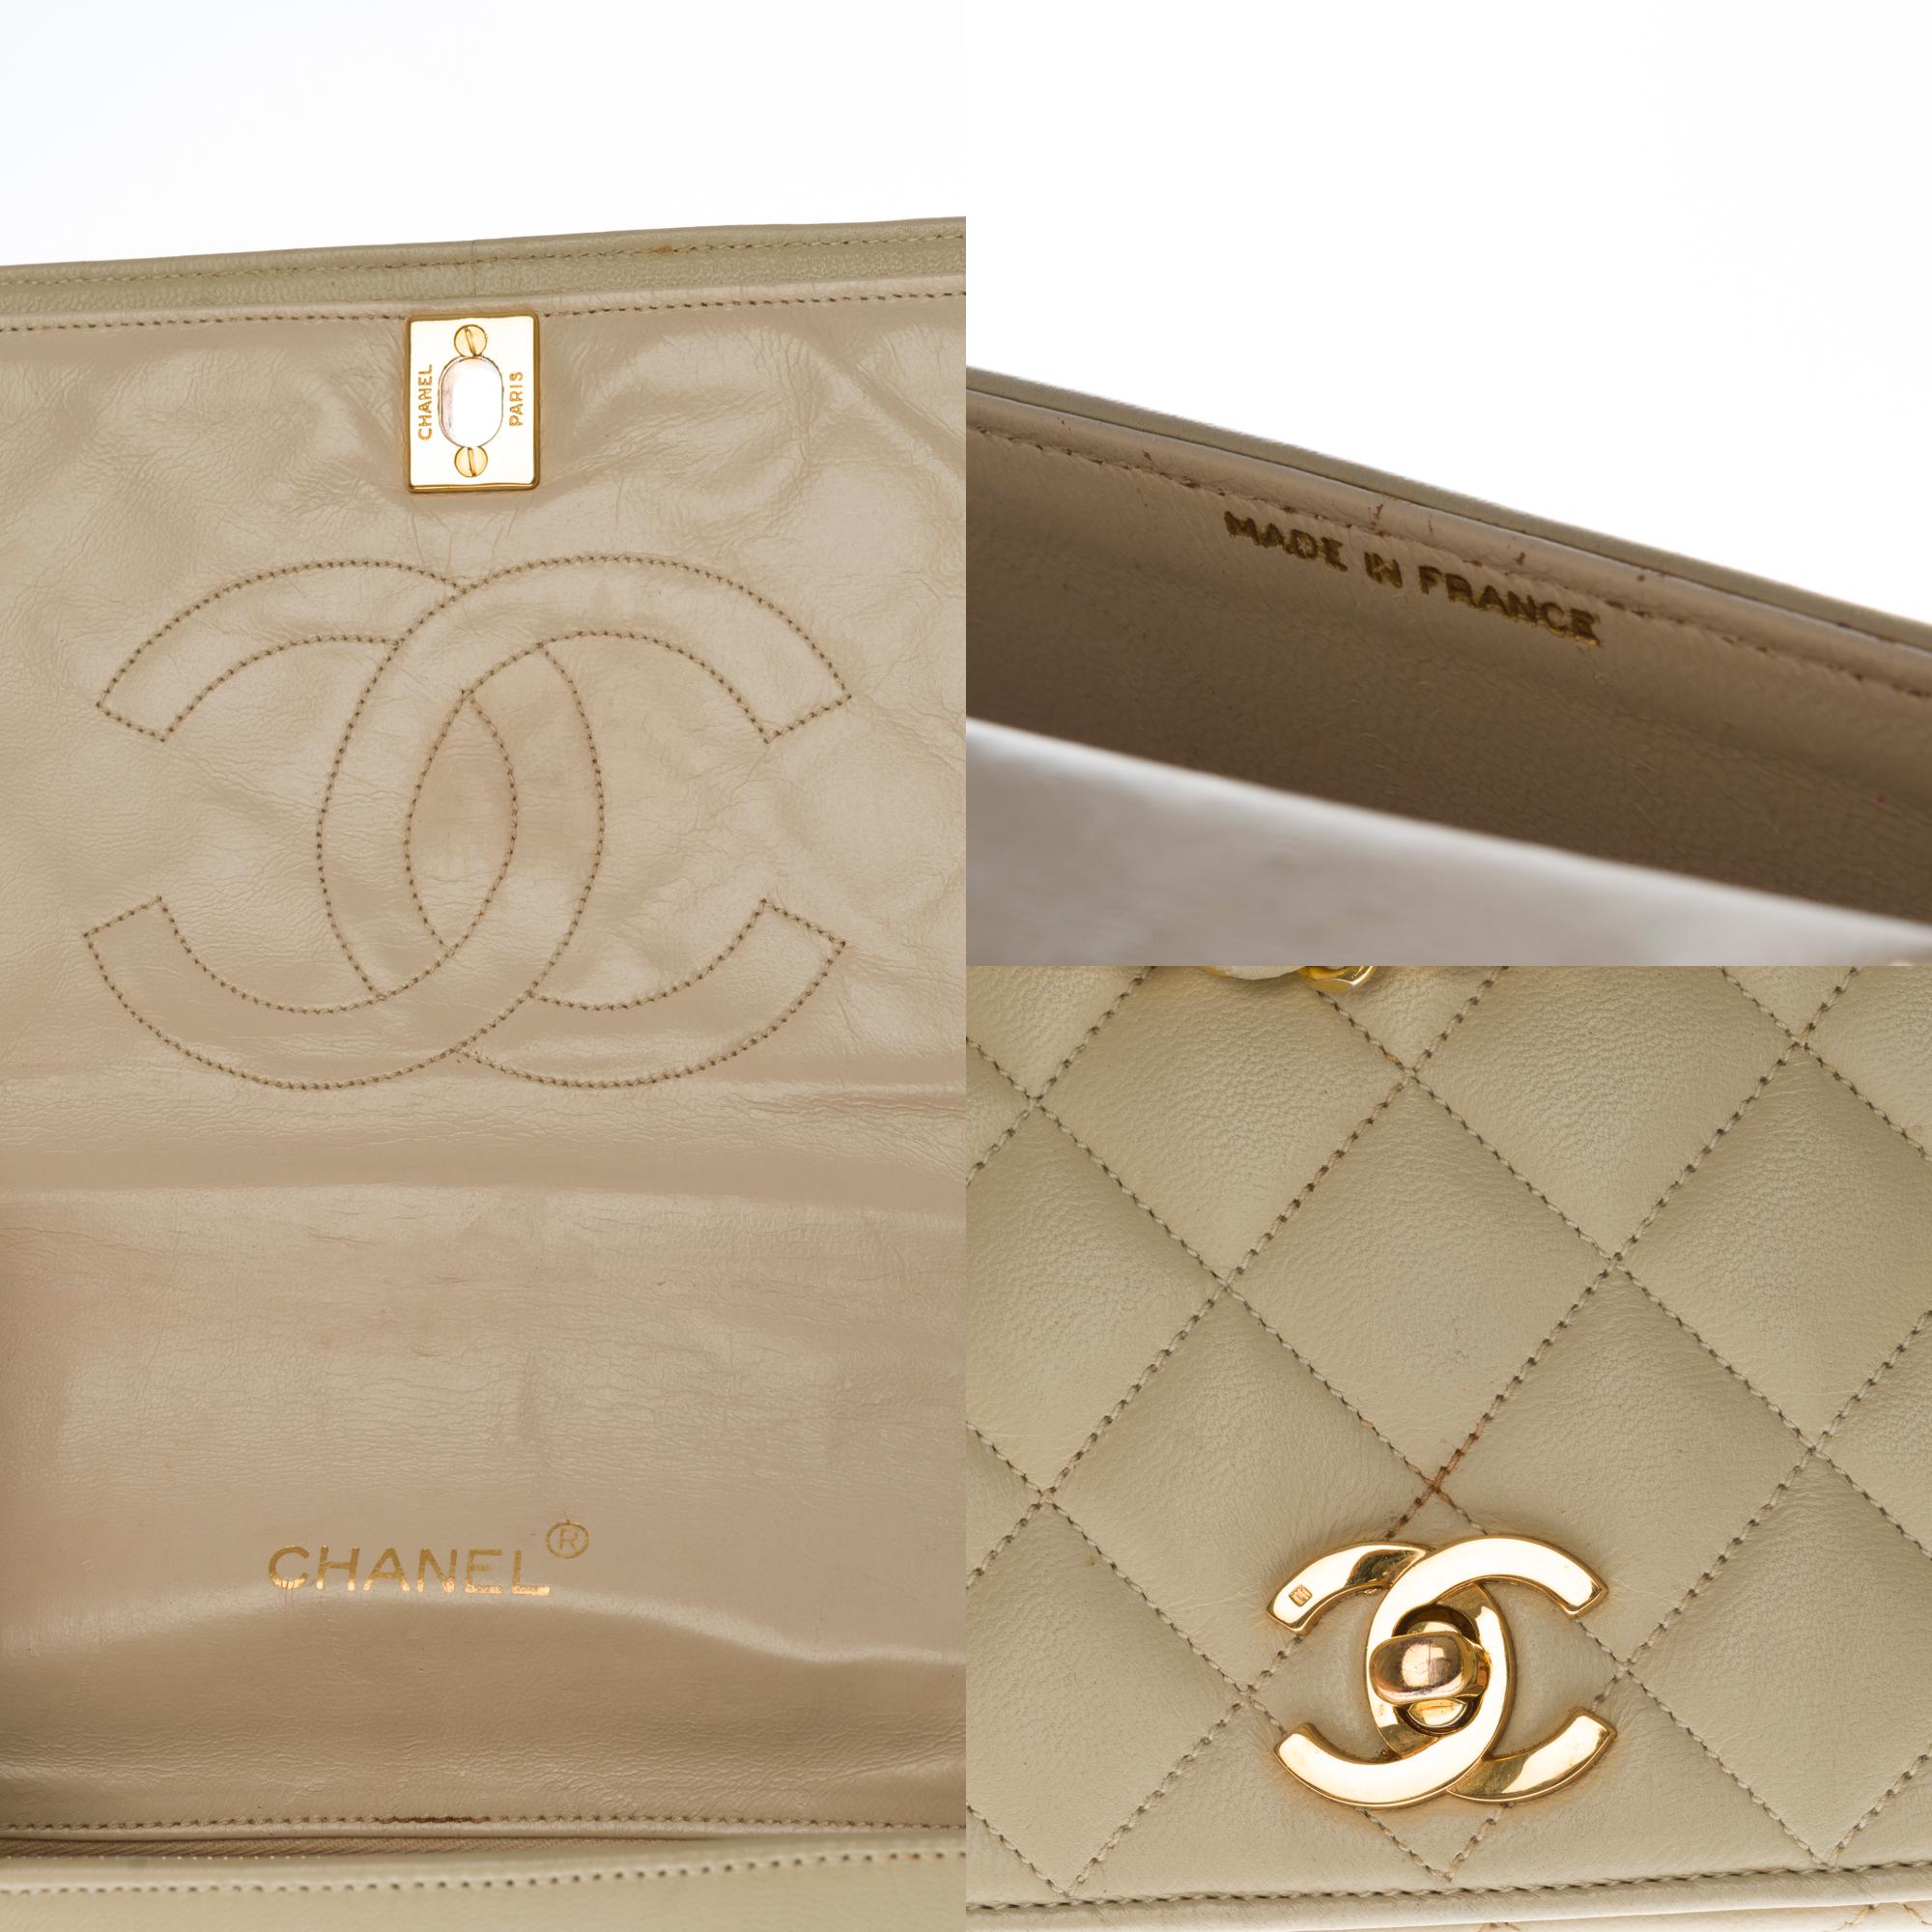 Beige Chanel Classic Full Flap shoulder bag in beige quilted leather and GHW